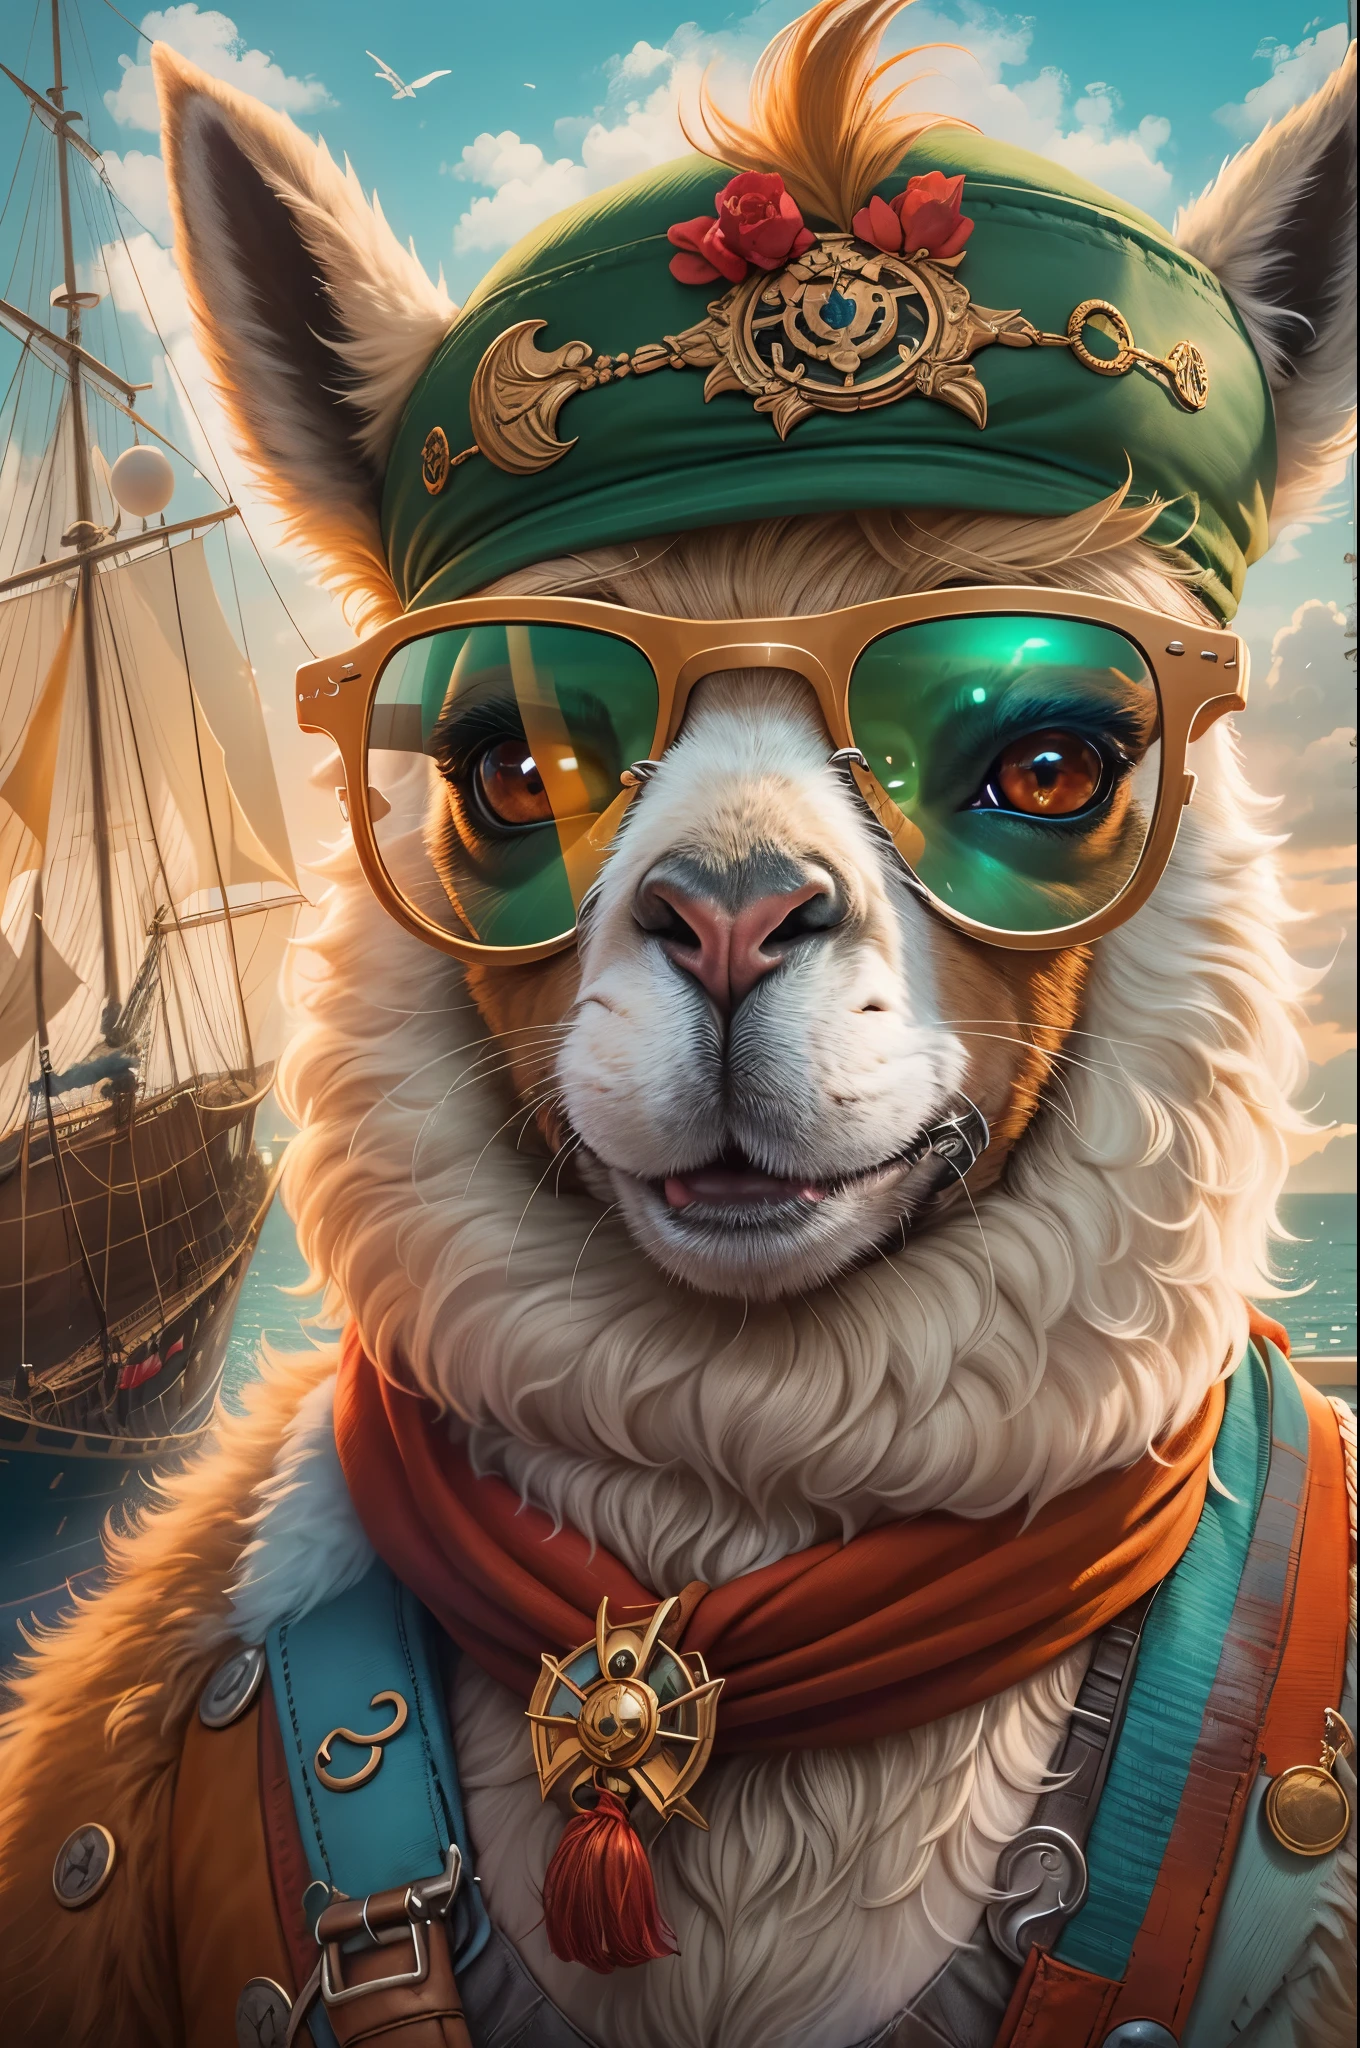 A hyperrealistic digital painting of an alpaca pirate, wearing sunglasses and bandana with a ship in the background. The style is reminiscent of Pixar's animation, with vibrant colors and detailed textures on its wool coat. It has expressive eyes that convey both curiosity and adventurous spirit.